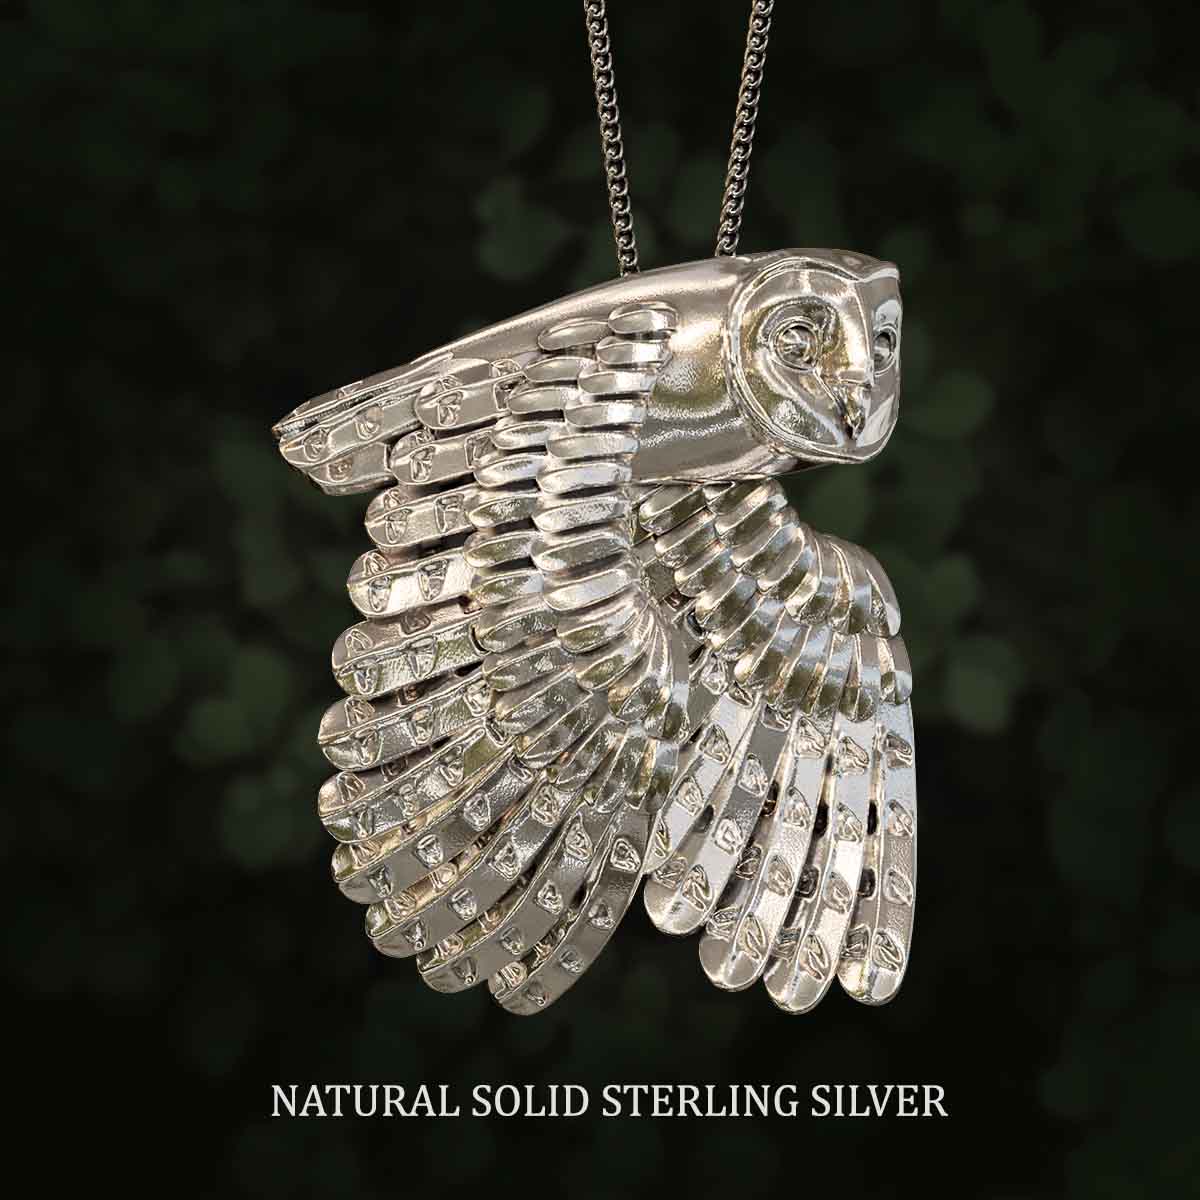 Natural-Satin-Polish-Solid-Sterling-Silver-Flying-Barn-Owl-Pendant-Jewelry-For-Necklace